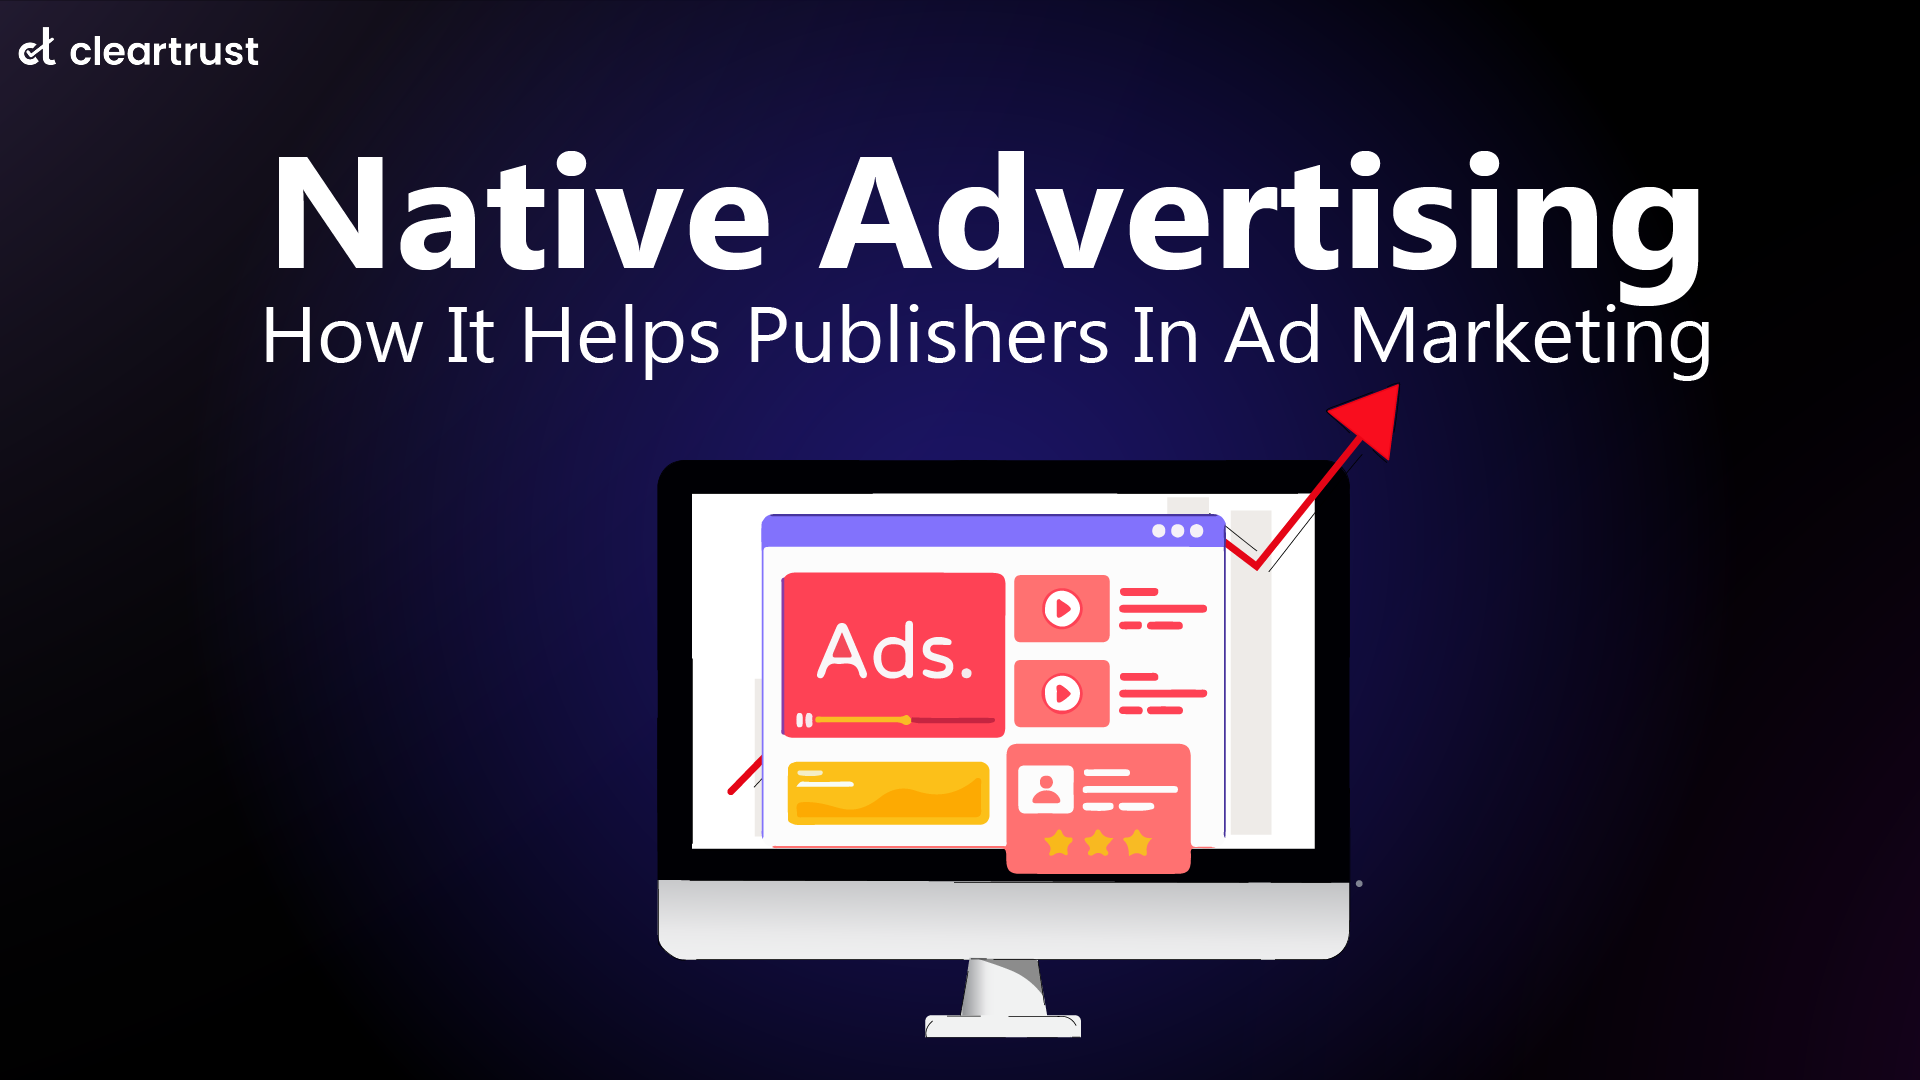 Native advertising - How it helps publishers in ad marketing